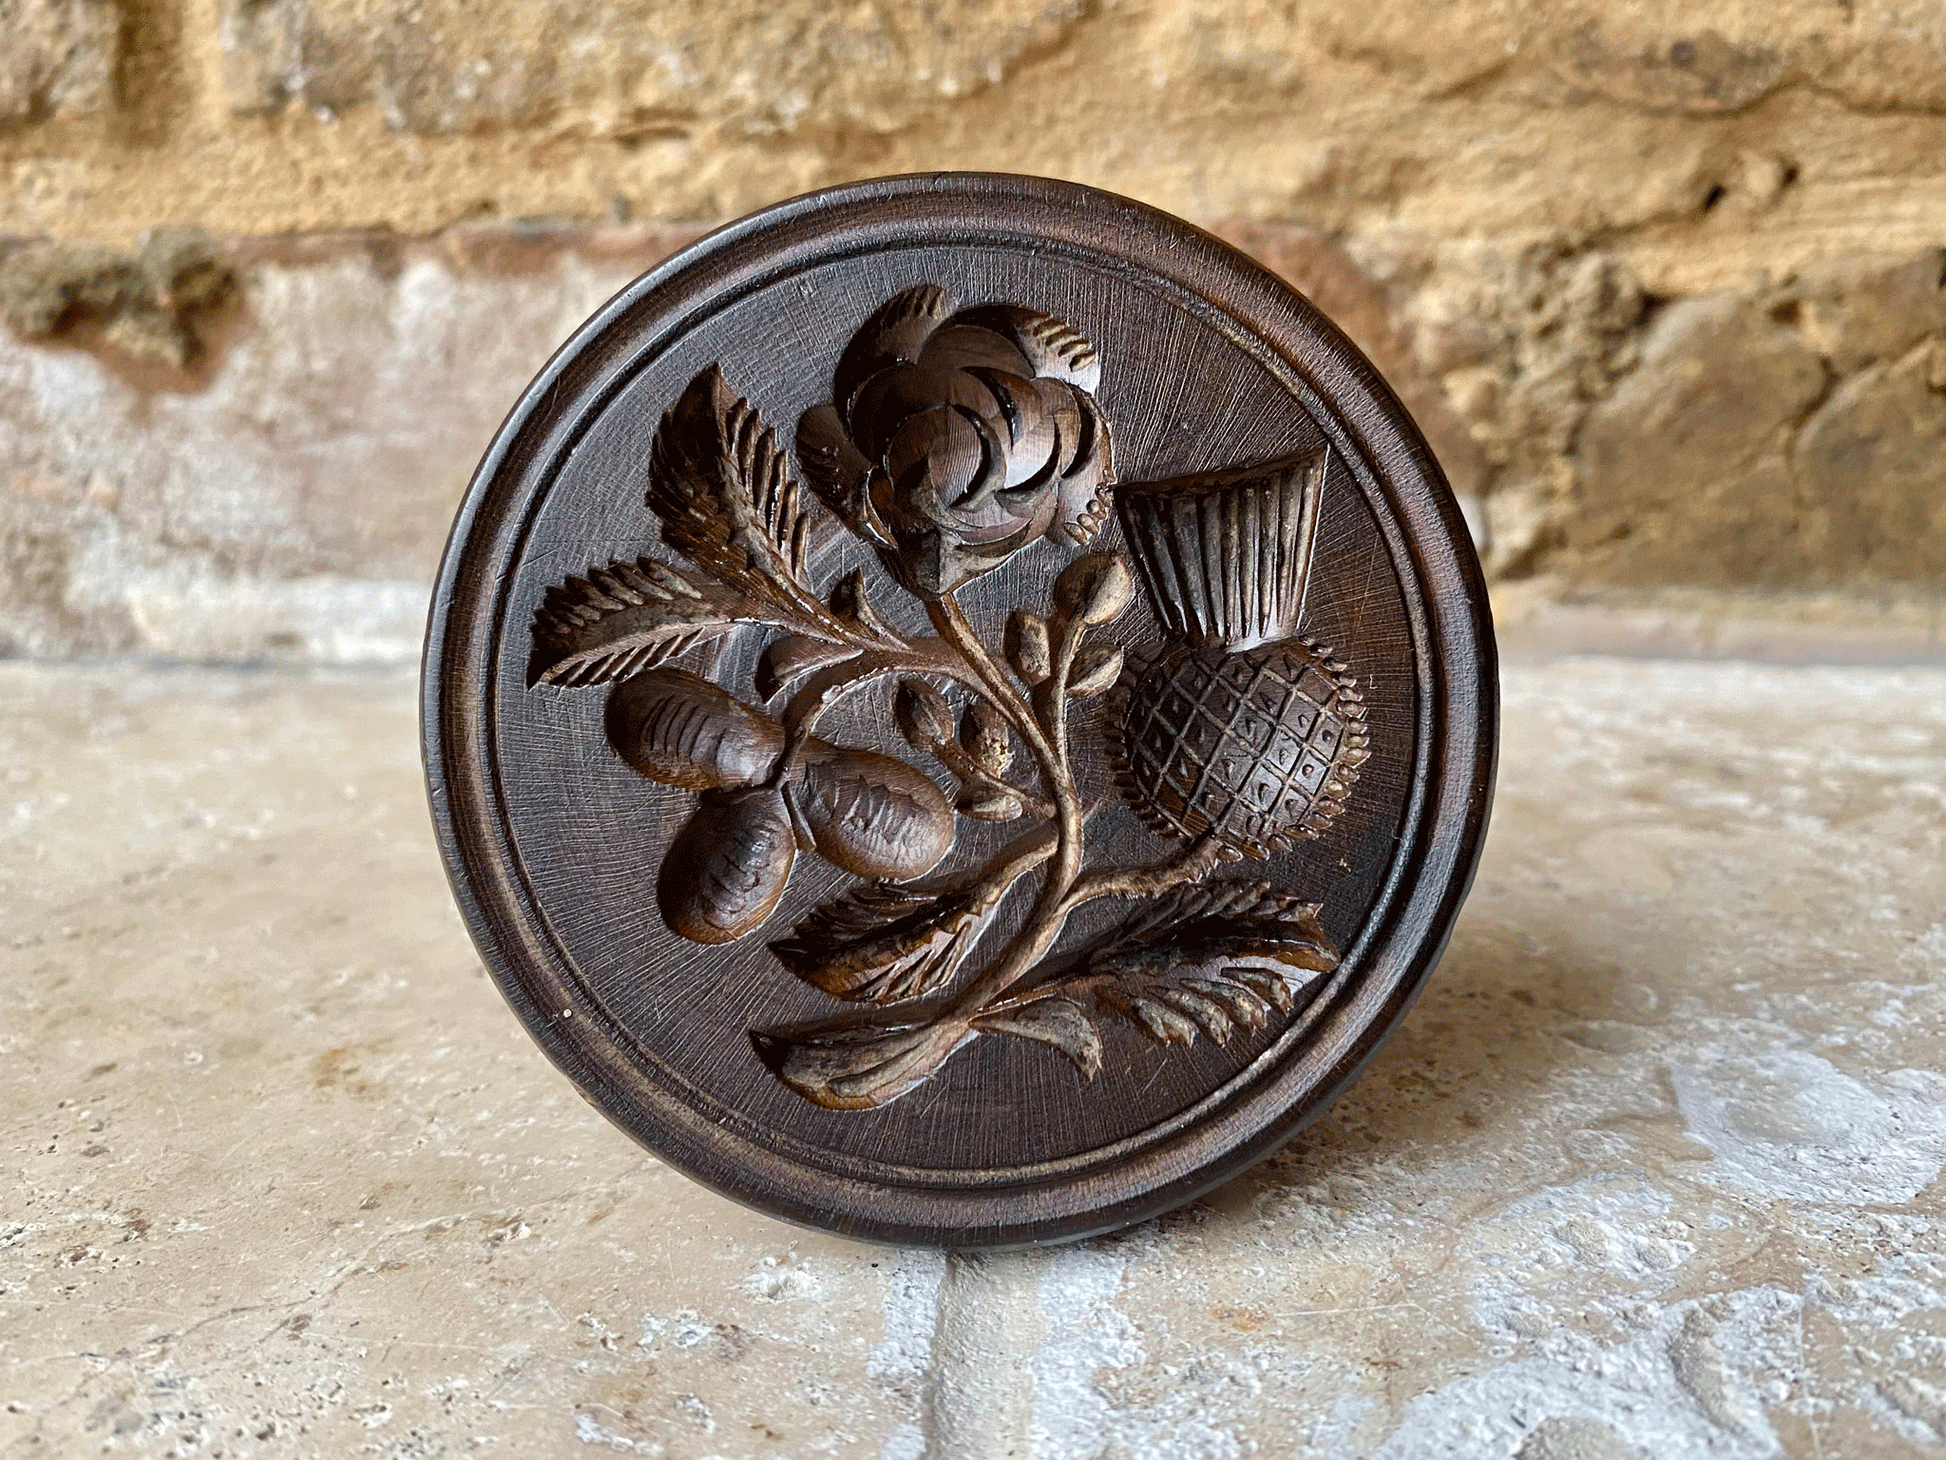 rare antique victorian english carved butter biscuit stamp marriage union gift english rose scottish thistle irish clover